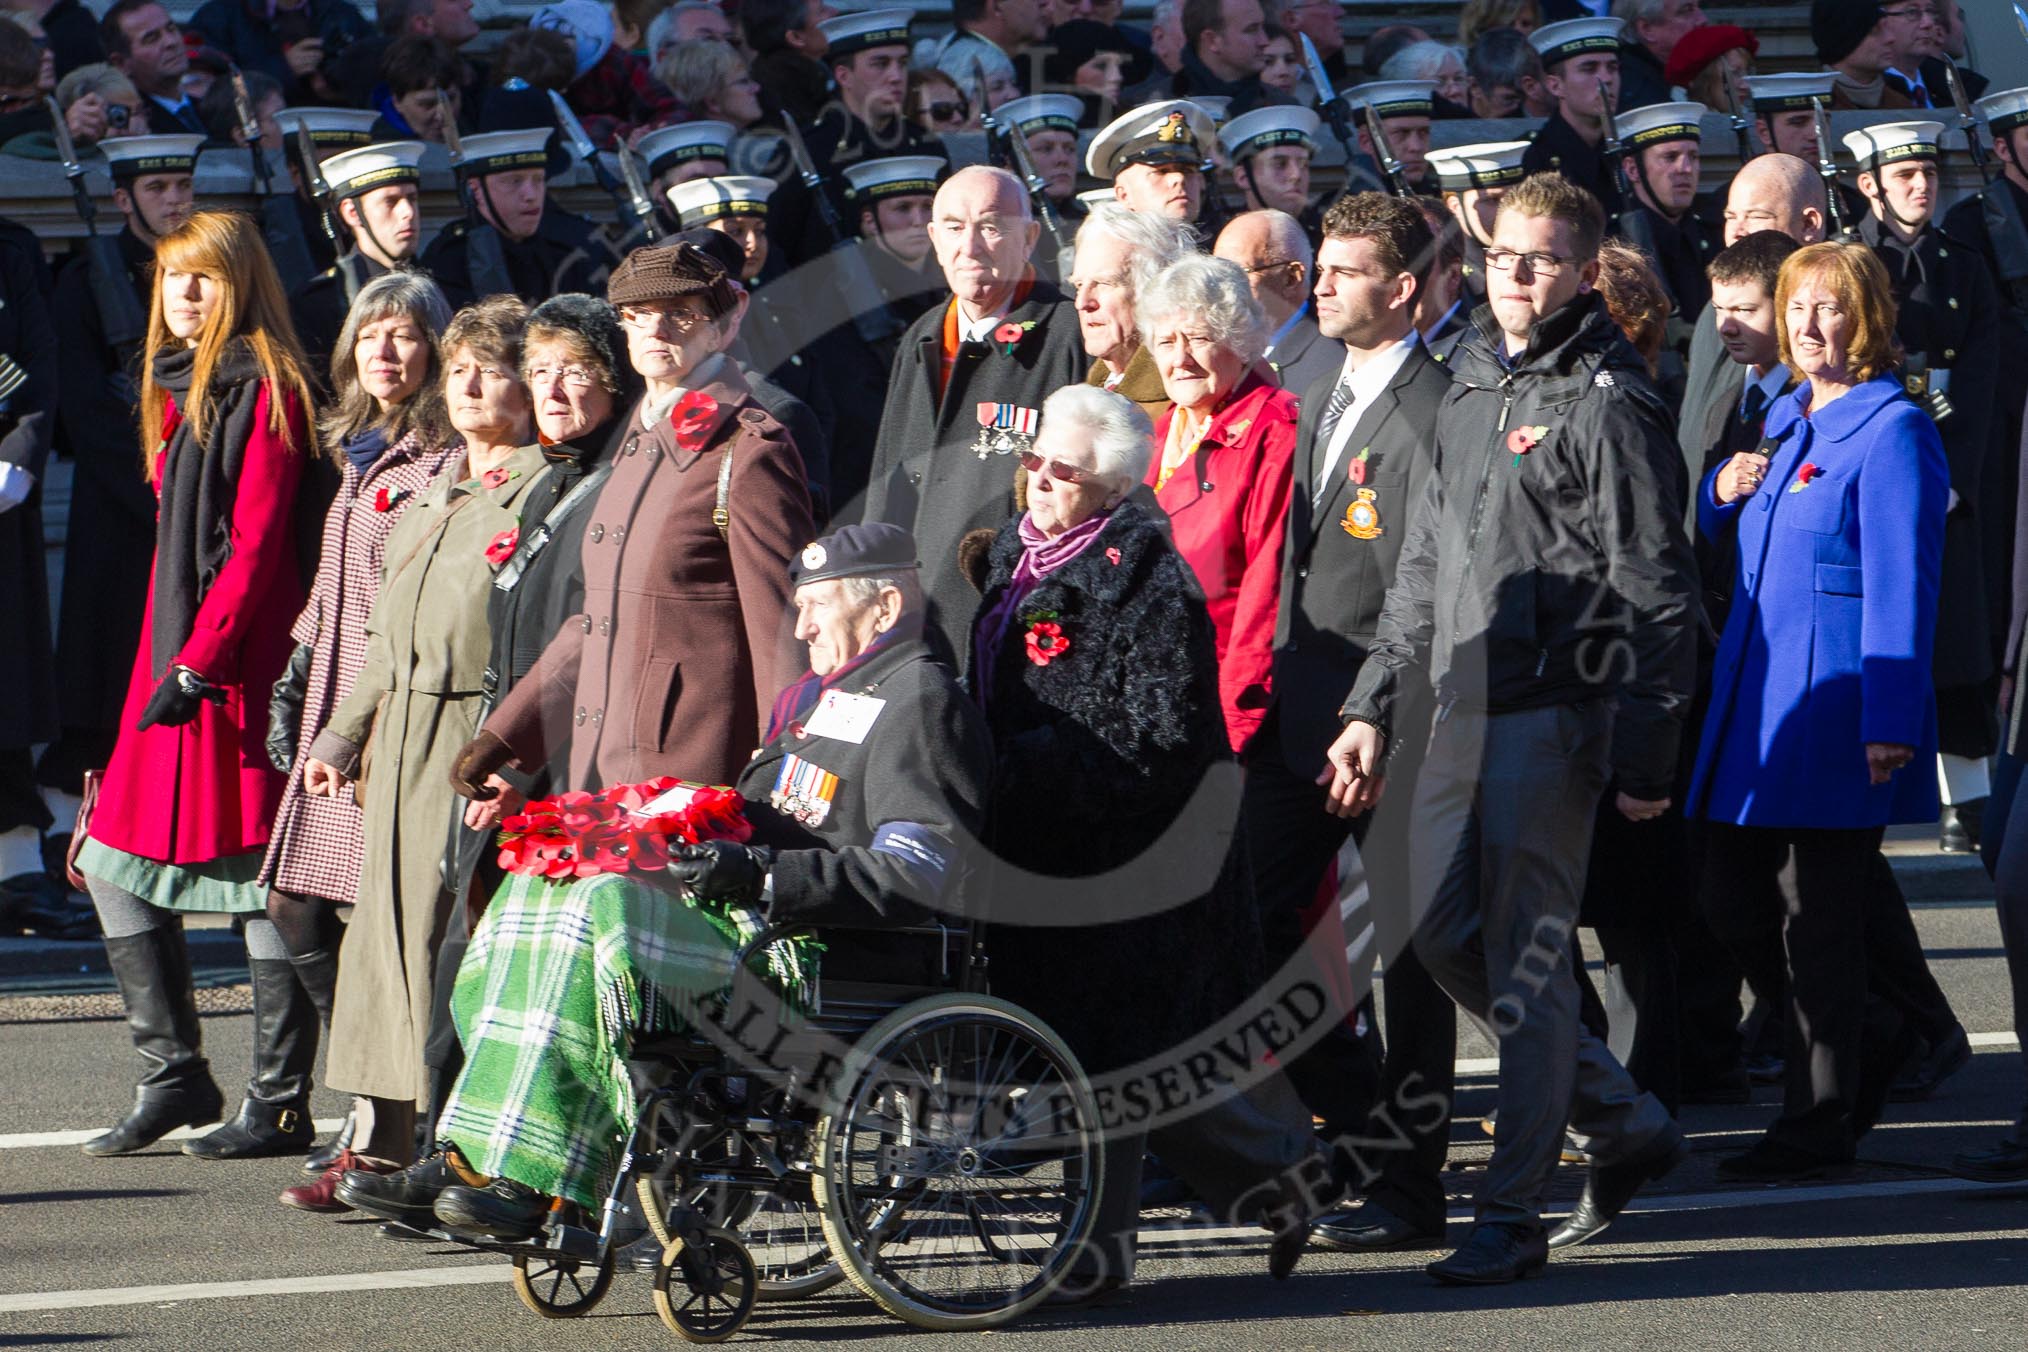 Remembrance Sunday 2012 Cenotaph March Past: Group D5 - British Nuclear Test Veterans Association..
Whitehall, Cenotaph,
London SW1,

United Kingdom,
on 11 November 2012 at 12:05, image #1253